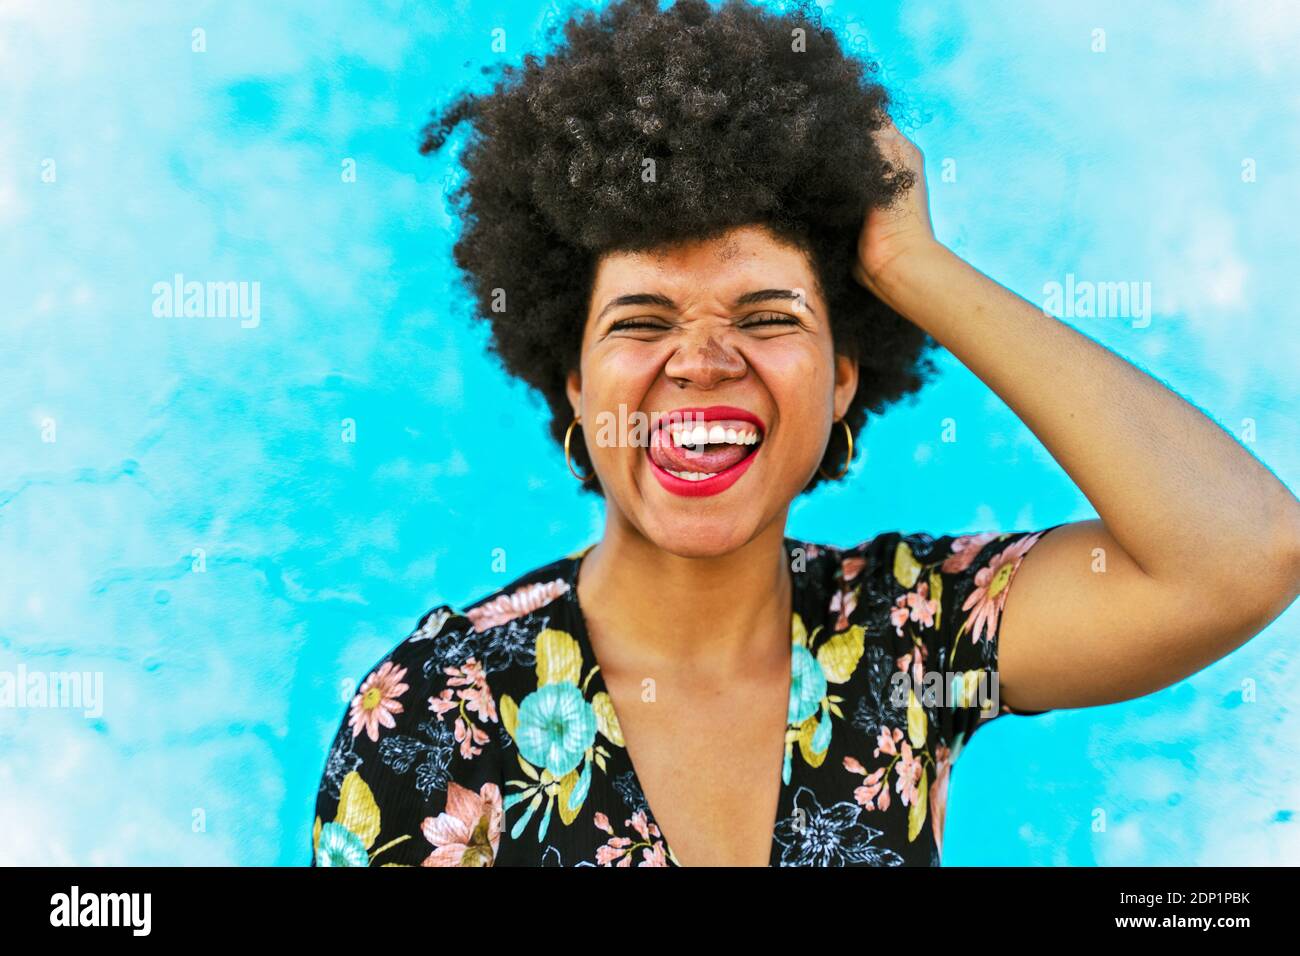 Portrait of female Afro-American woman, hand in hair Stock Photo